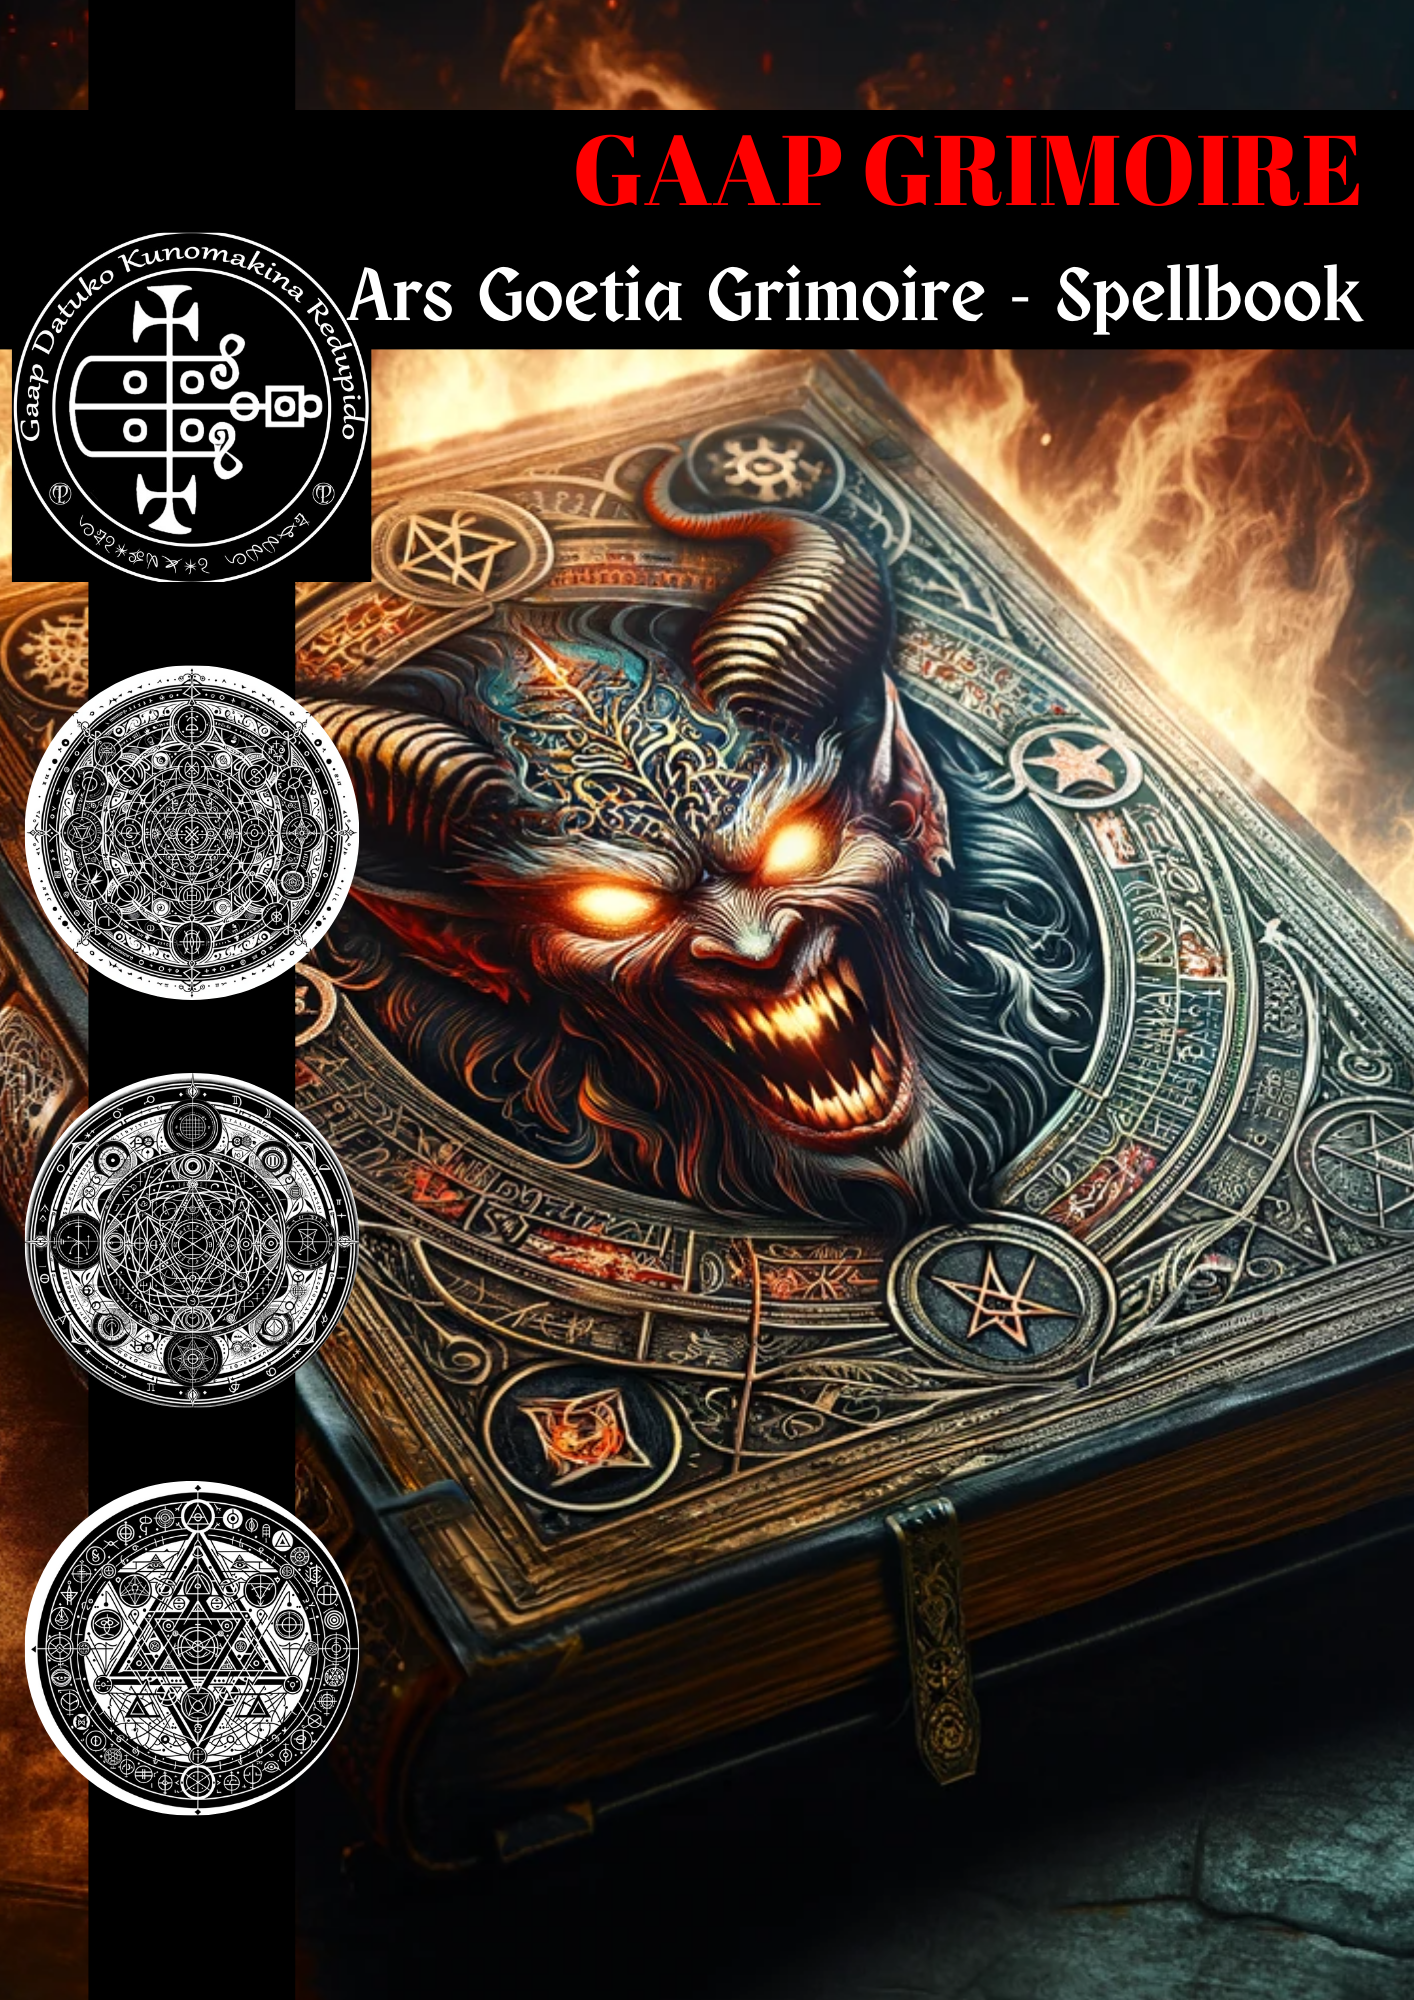 Grimoire of Gaap Spells & Rituals for Lucid Dreaming and Dream Explanation - Abraxas Amulets ® Magic ♾️ Talismans ♾️ نوښتونه